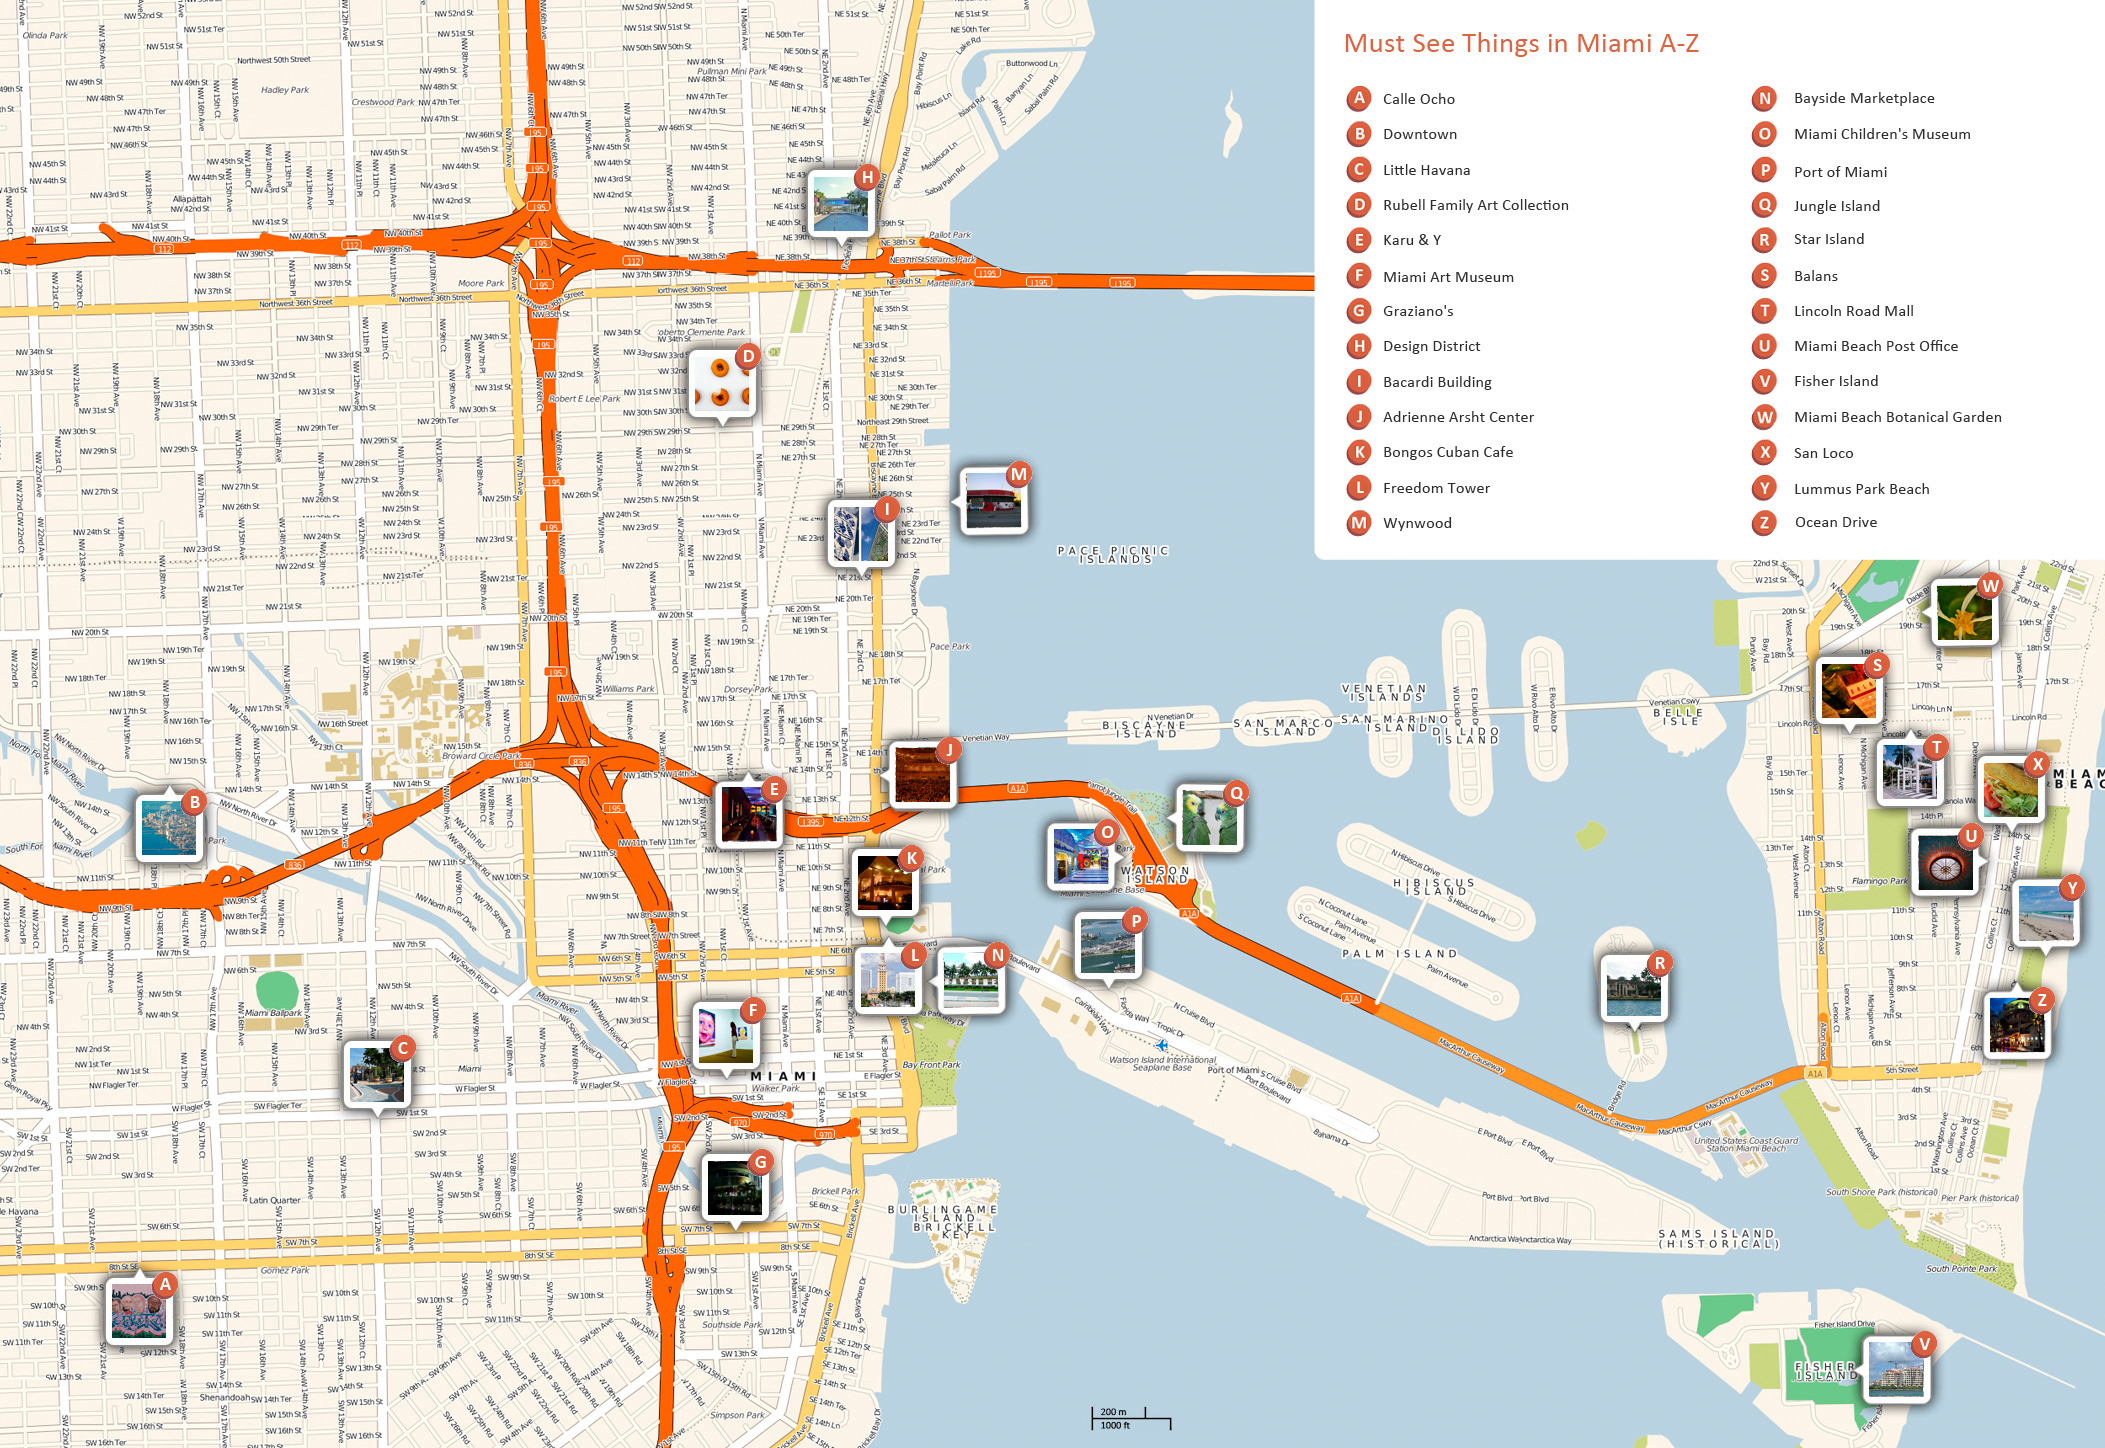 Large Miami Maps For Free Download And Print | High-Resolution And - Street Map Of Miami Florida